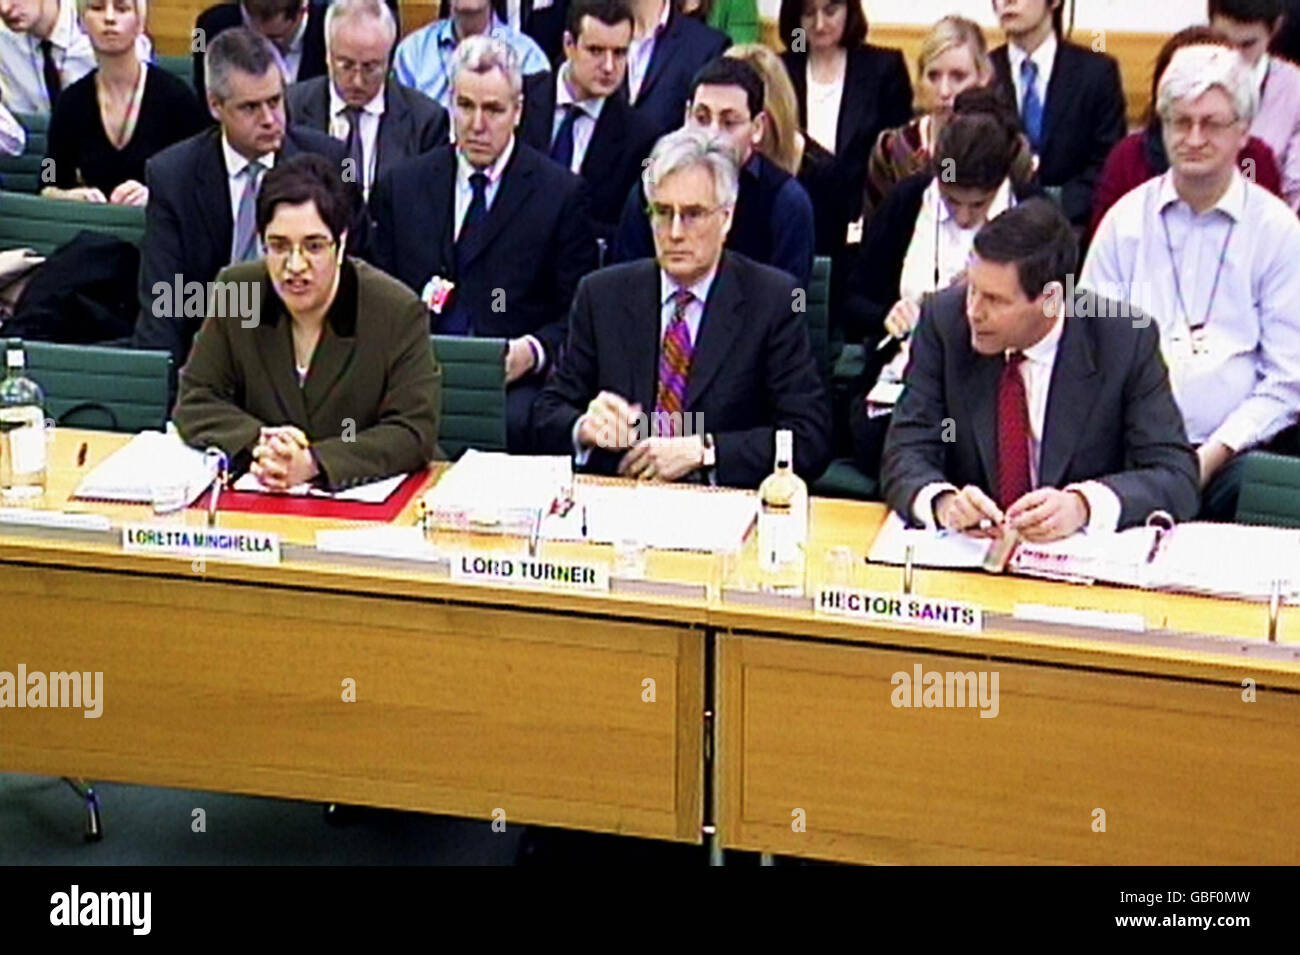 (left to right) Chief Executive of the Financial Services Compensation Scheme Loretta Minghella, Chairman of the FSA Lord Turner and Chief Executive Officer of the FSA give evidence at the Treasury Committee meeting on the Banking Crisis inside the Wilson Room, Portcullis House, central London. Stock Photo